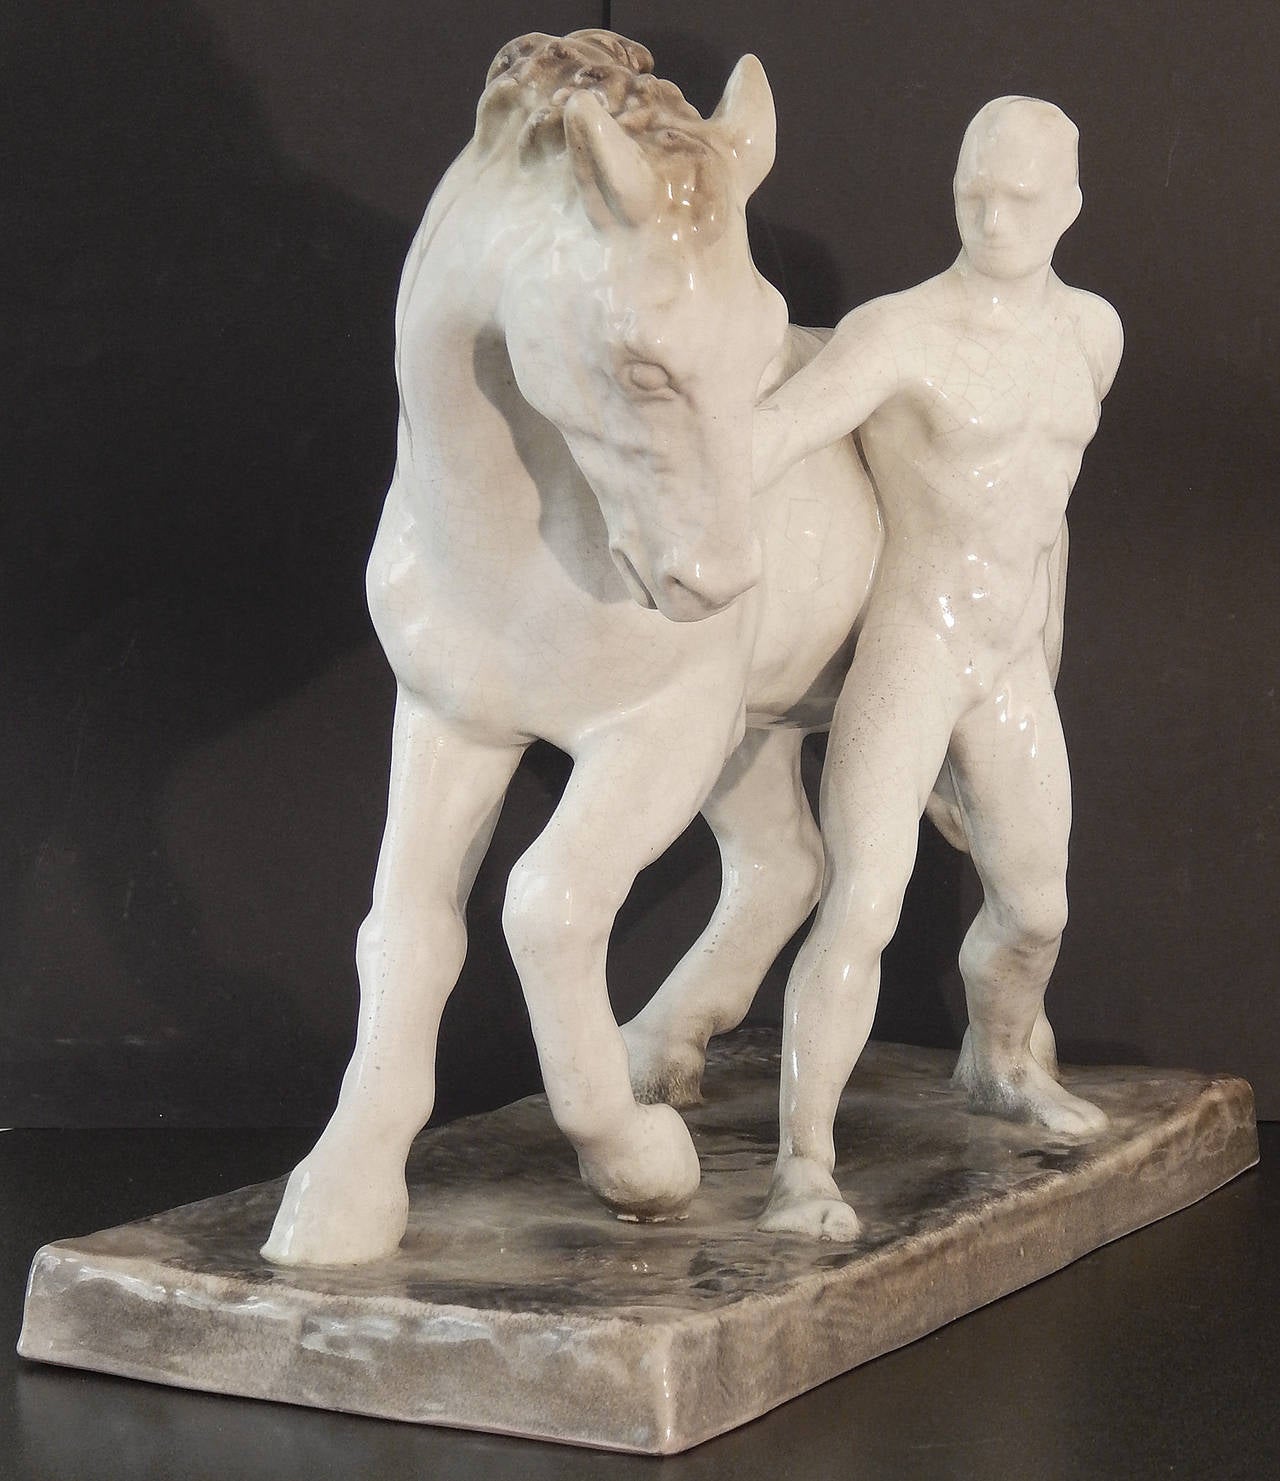 The large and rare Majolica group consisting of a nude male figure walking a horse was sculpted by Else Bach for the famous Karlsruhe ceramic works in the 1920s-1930s. Bach is best known as an animalier, although she also liked to pair nude male